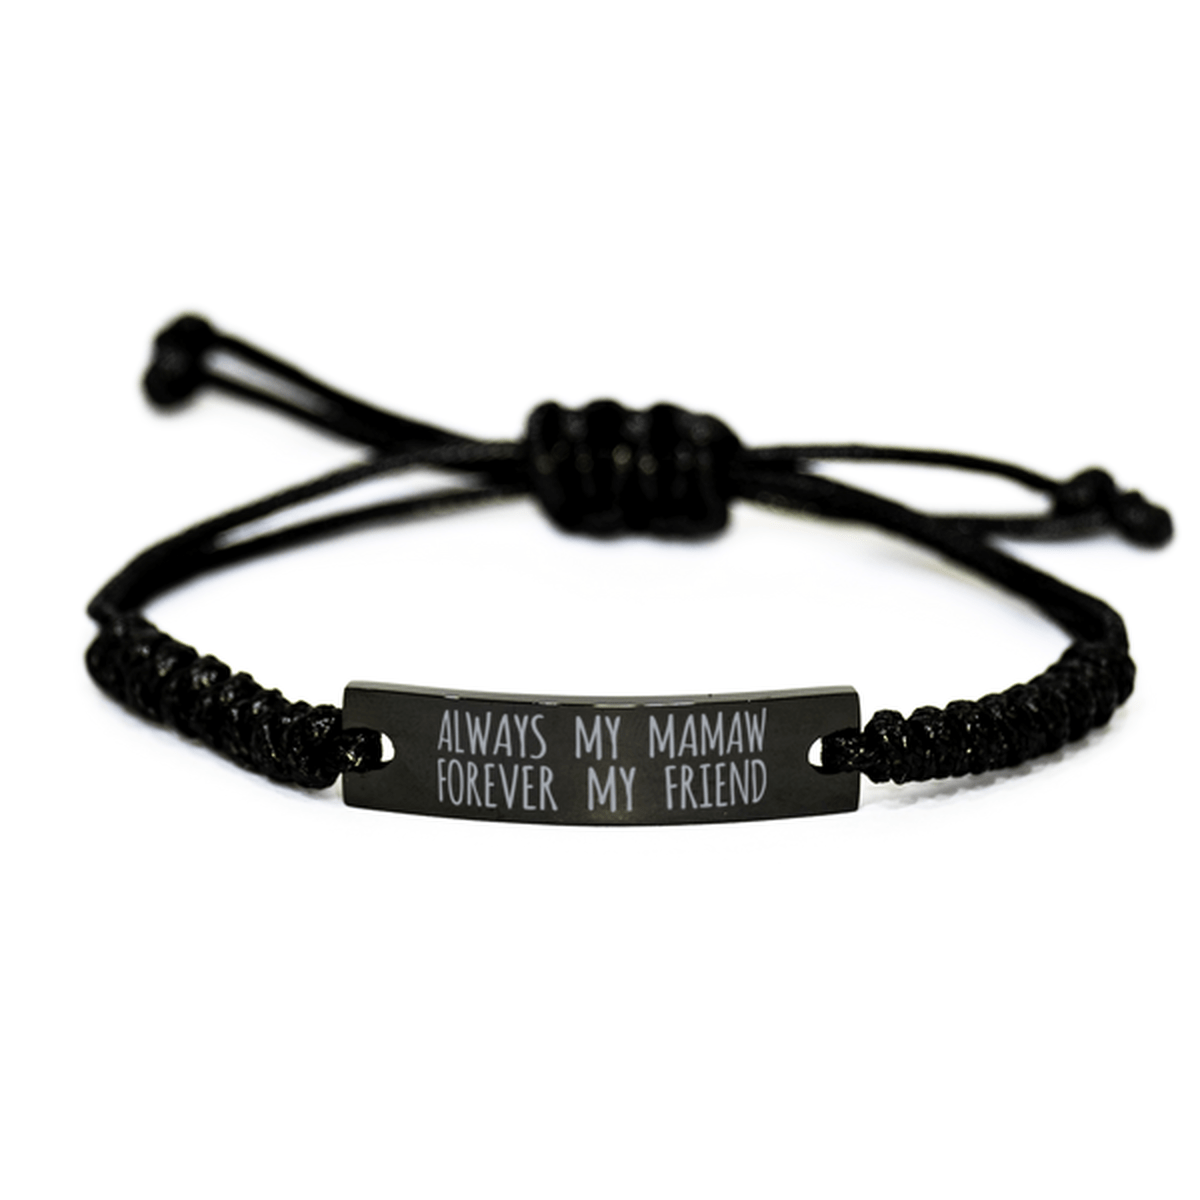 Inspirational Mamaw Black Rope Bracelet, Always My Mamaw Forever My Friend, Best Birthday Gifts For Family